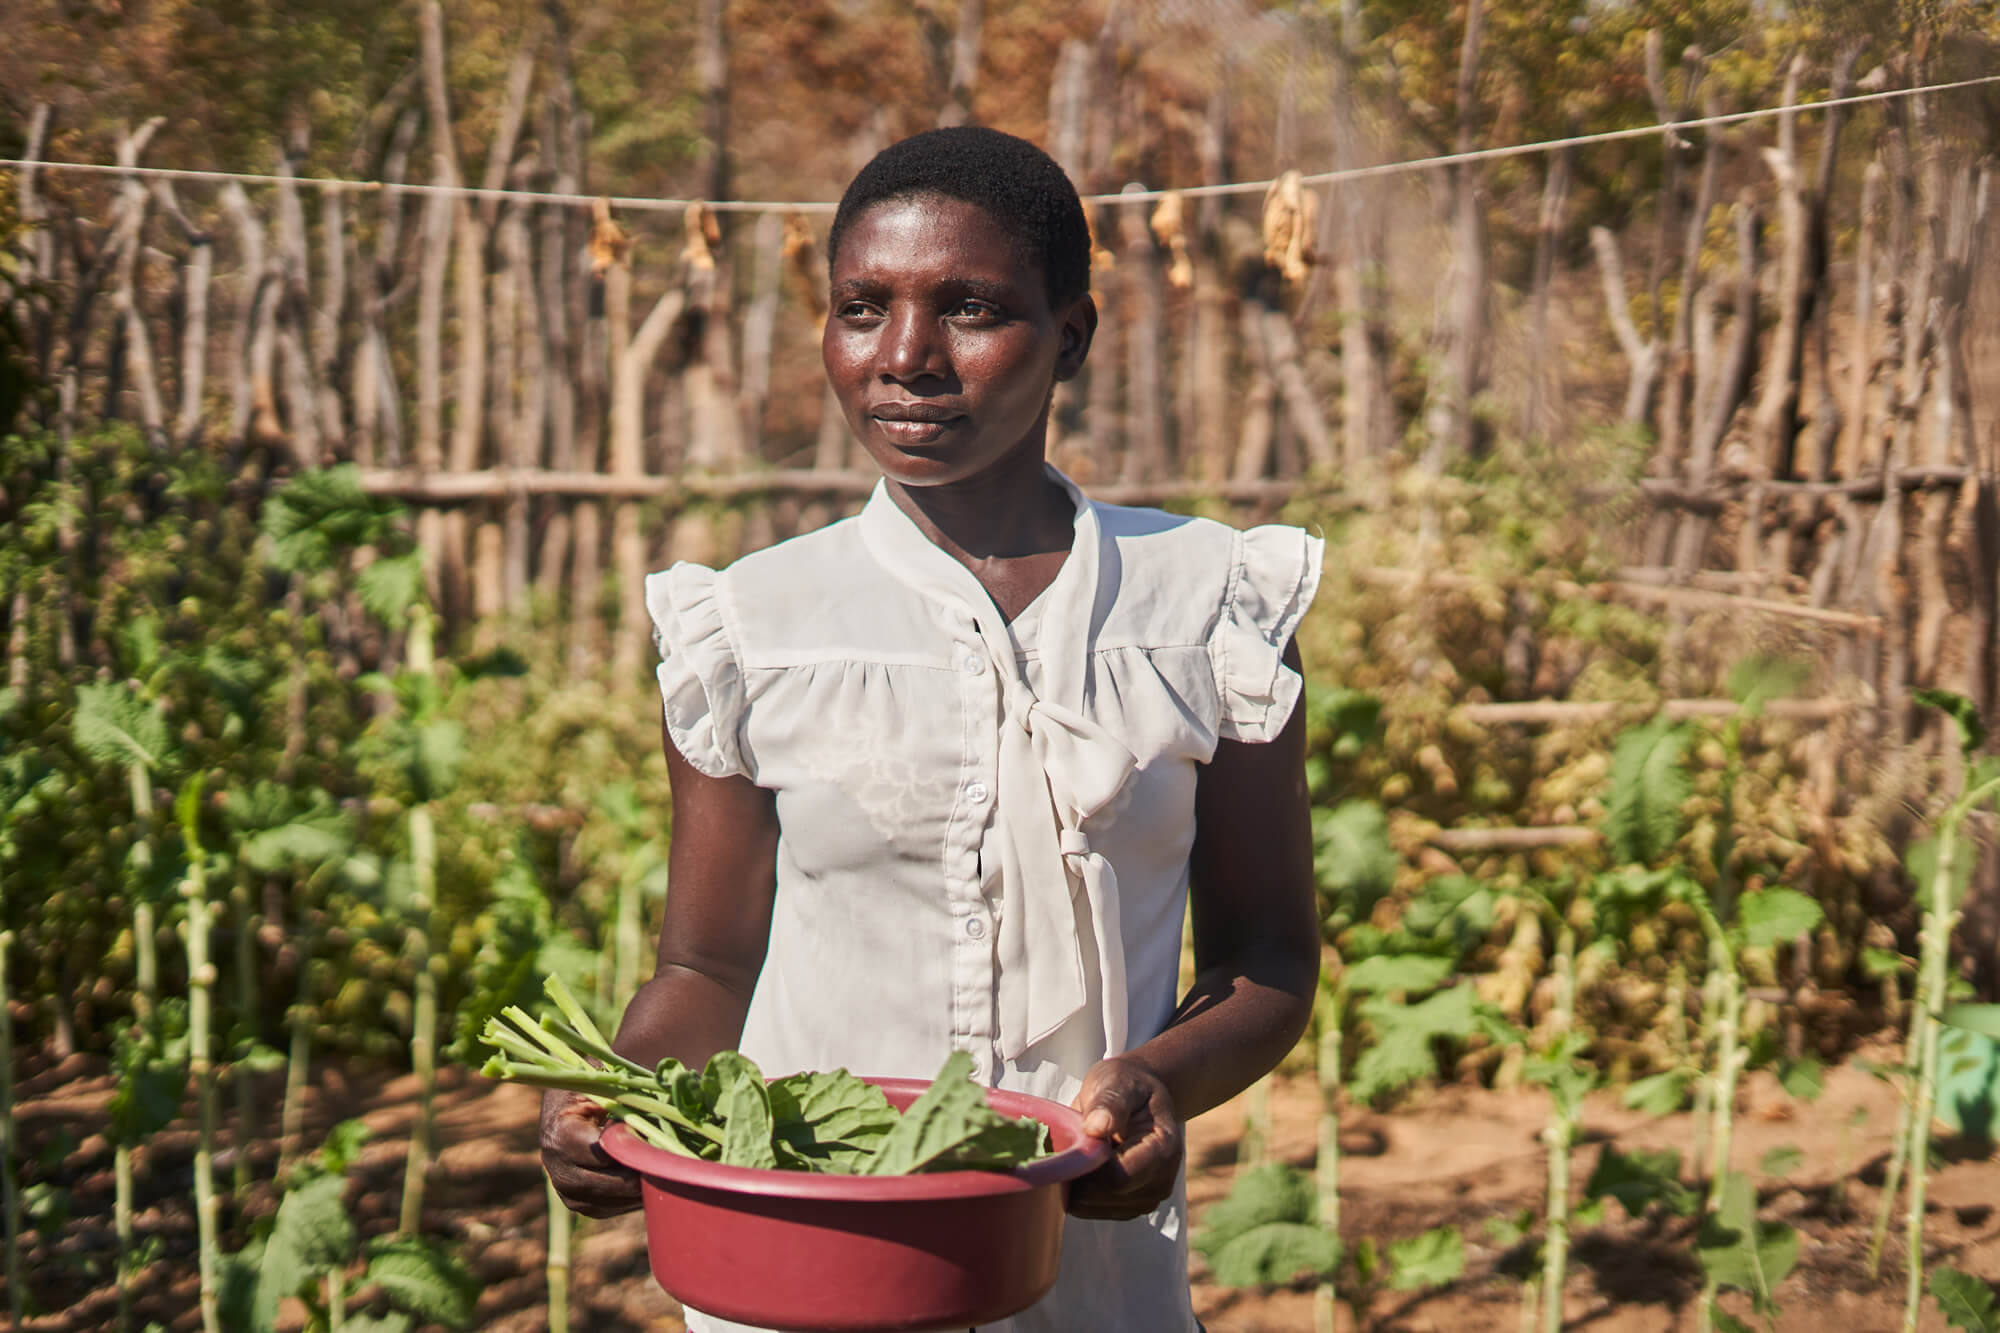 Reason Mwembe, a resident of Chilimbana village, gathers vegetables from her home garden.